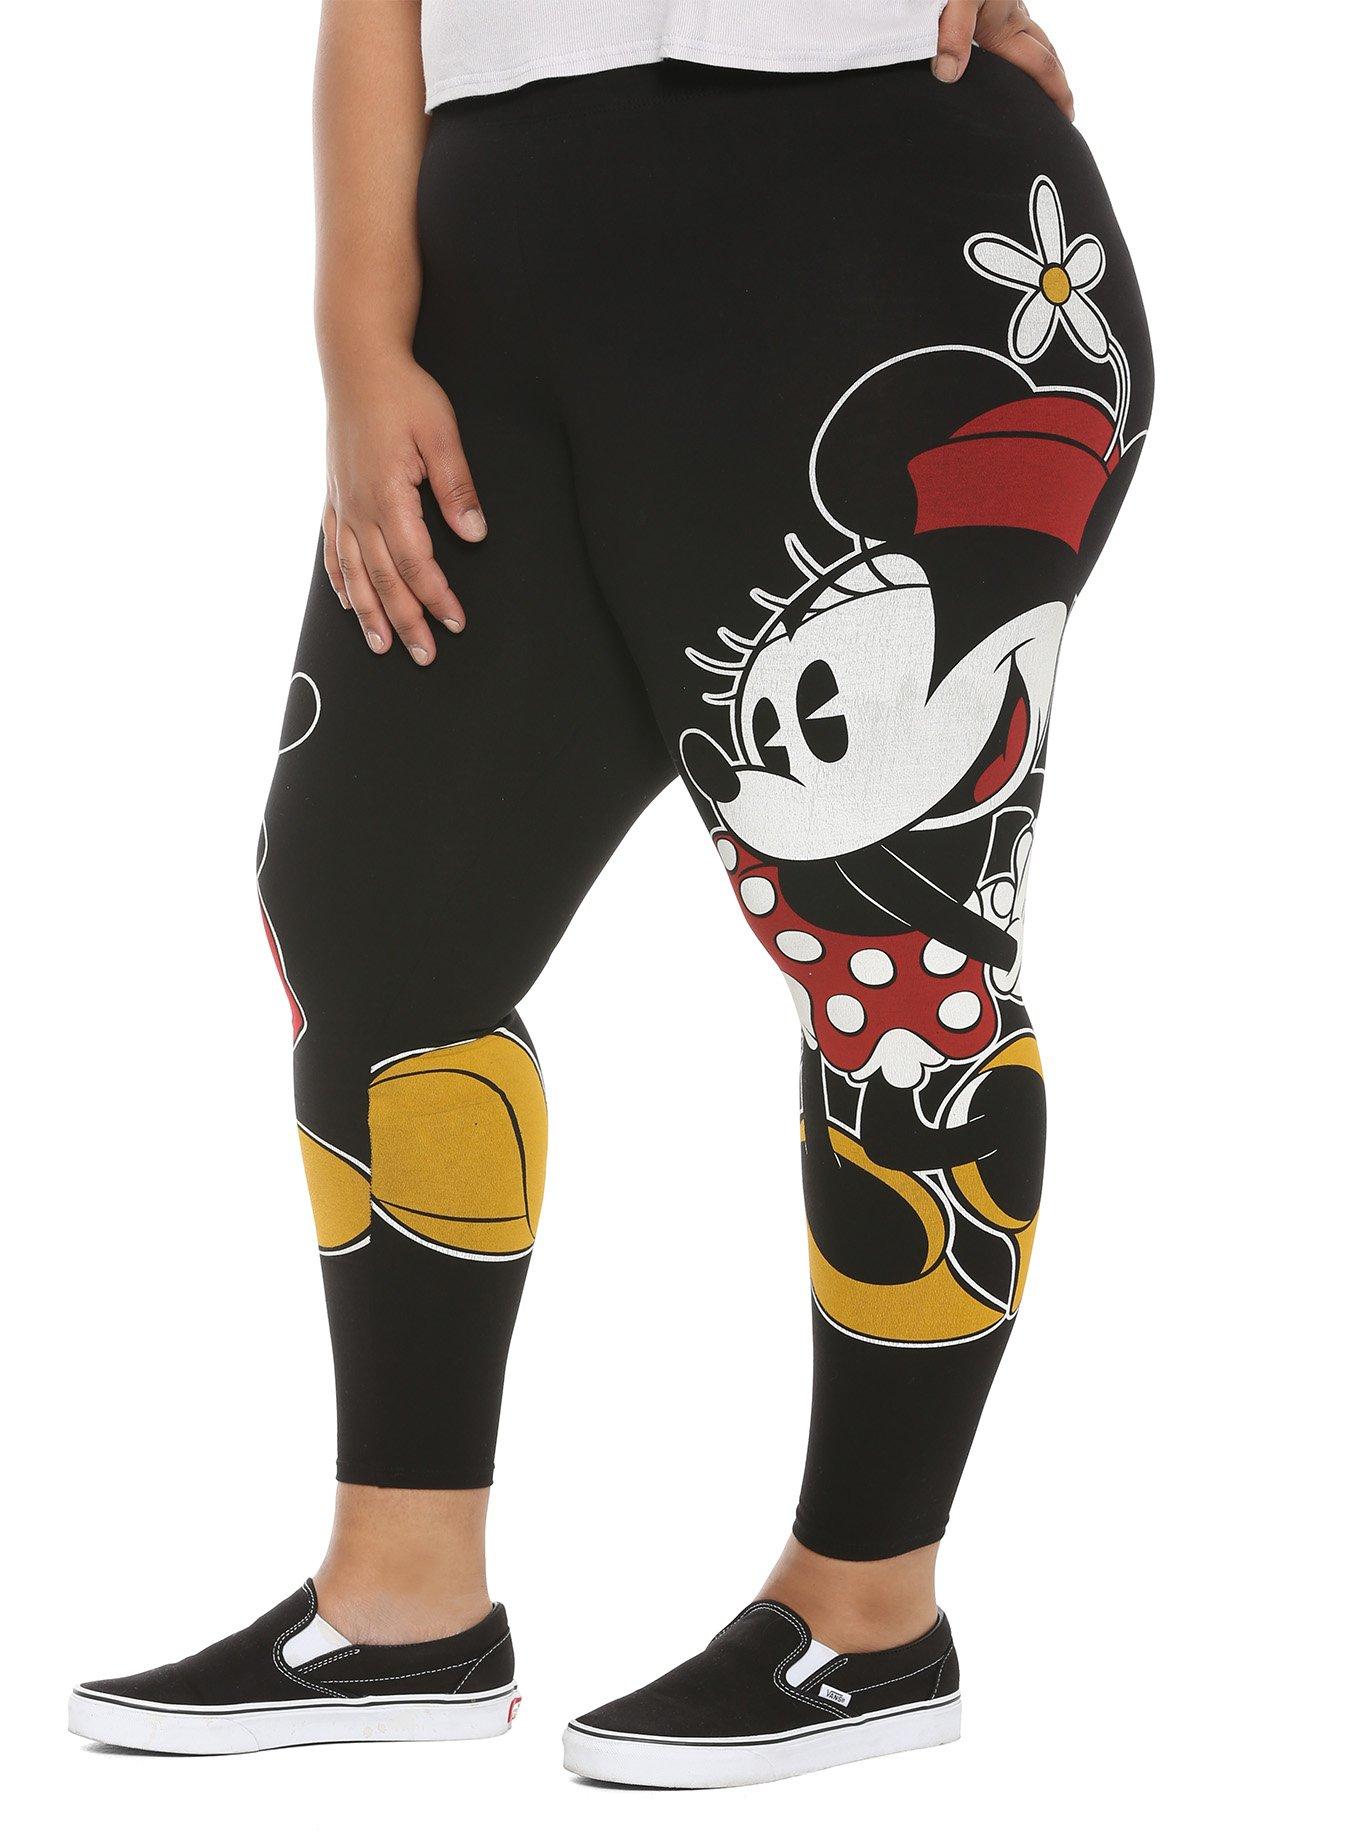 Disney Mickey Mouse & Minnie Mouse Mirrored Leggings Plus Size